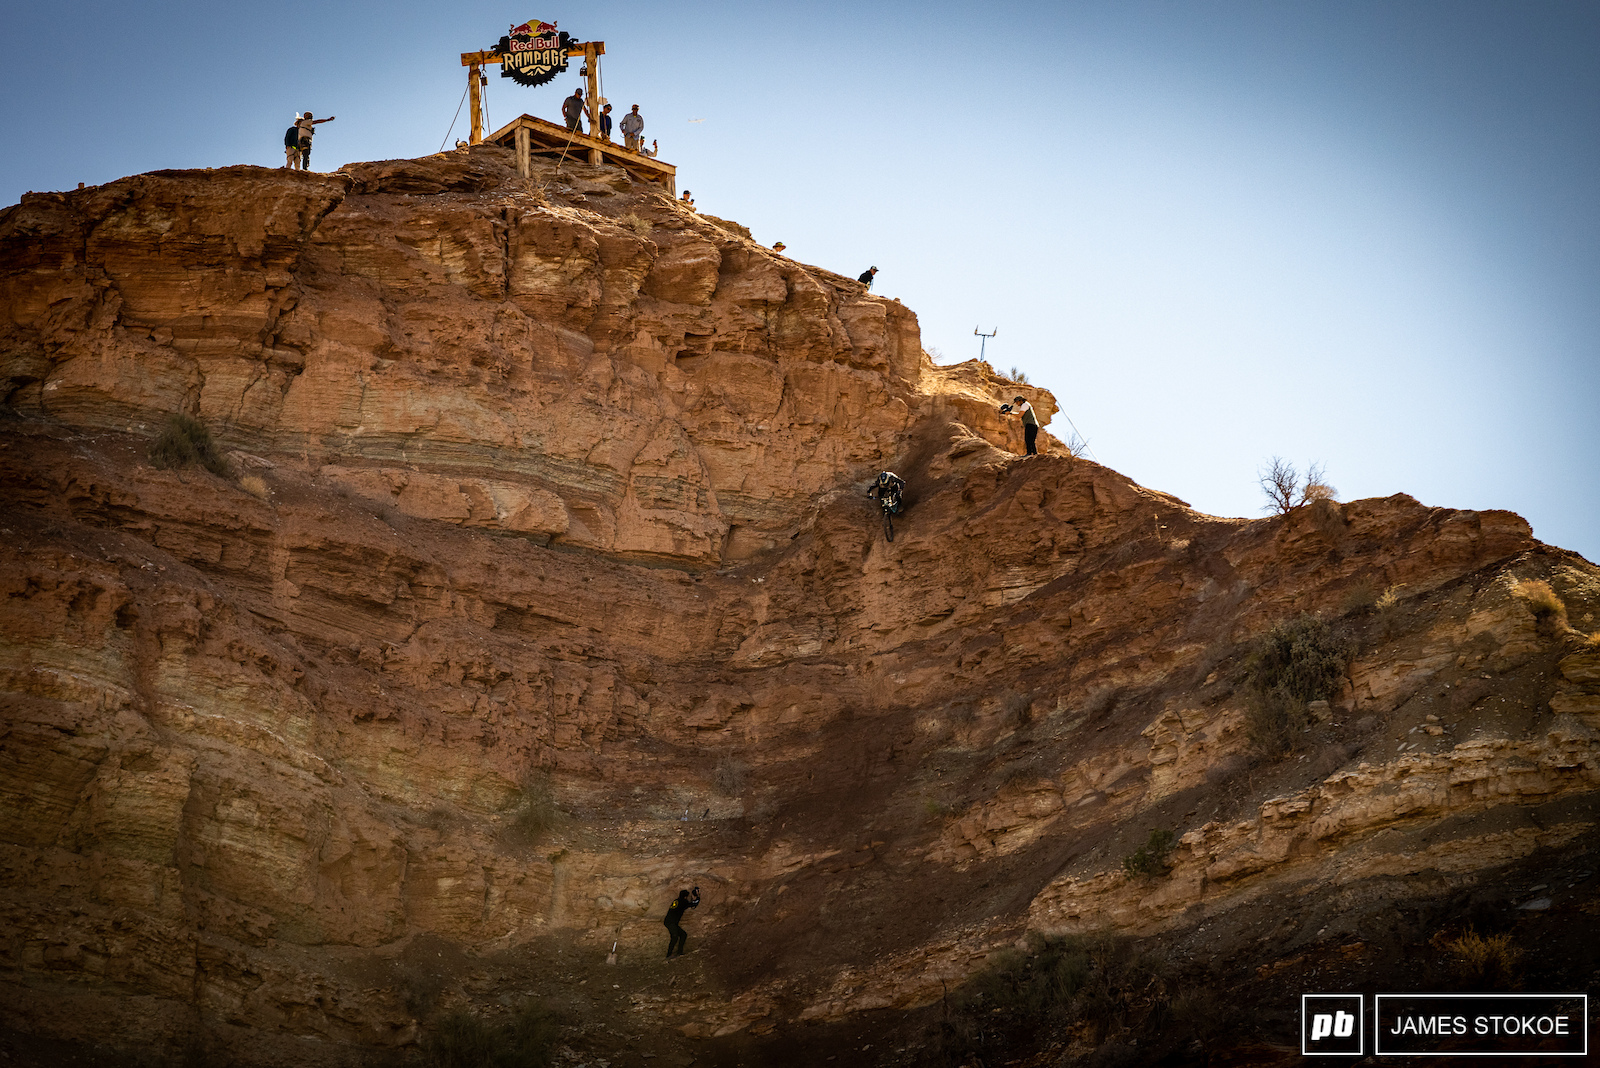 The living legend Kyle Strait hits his chute and truly makes it look easy - there s nothing easy about anything out on site.